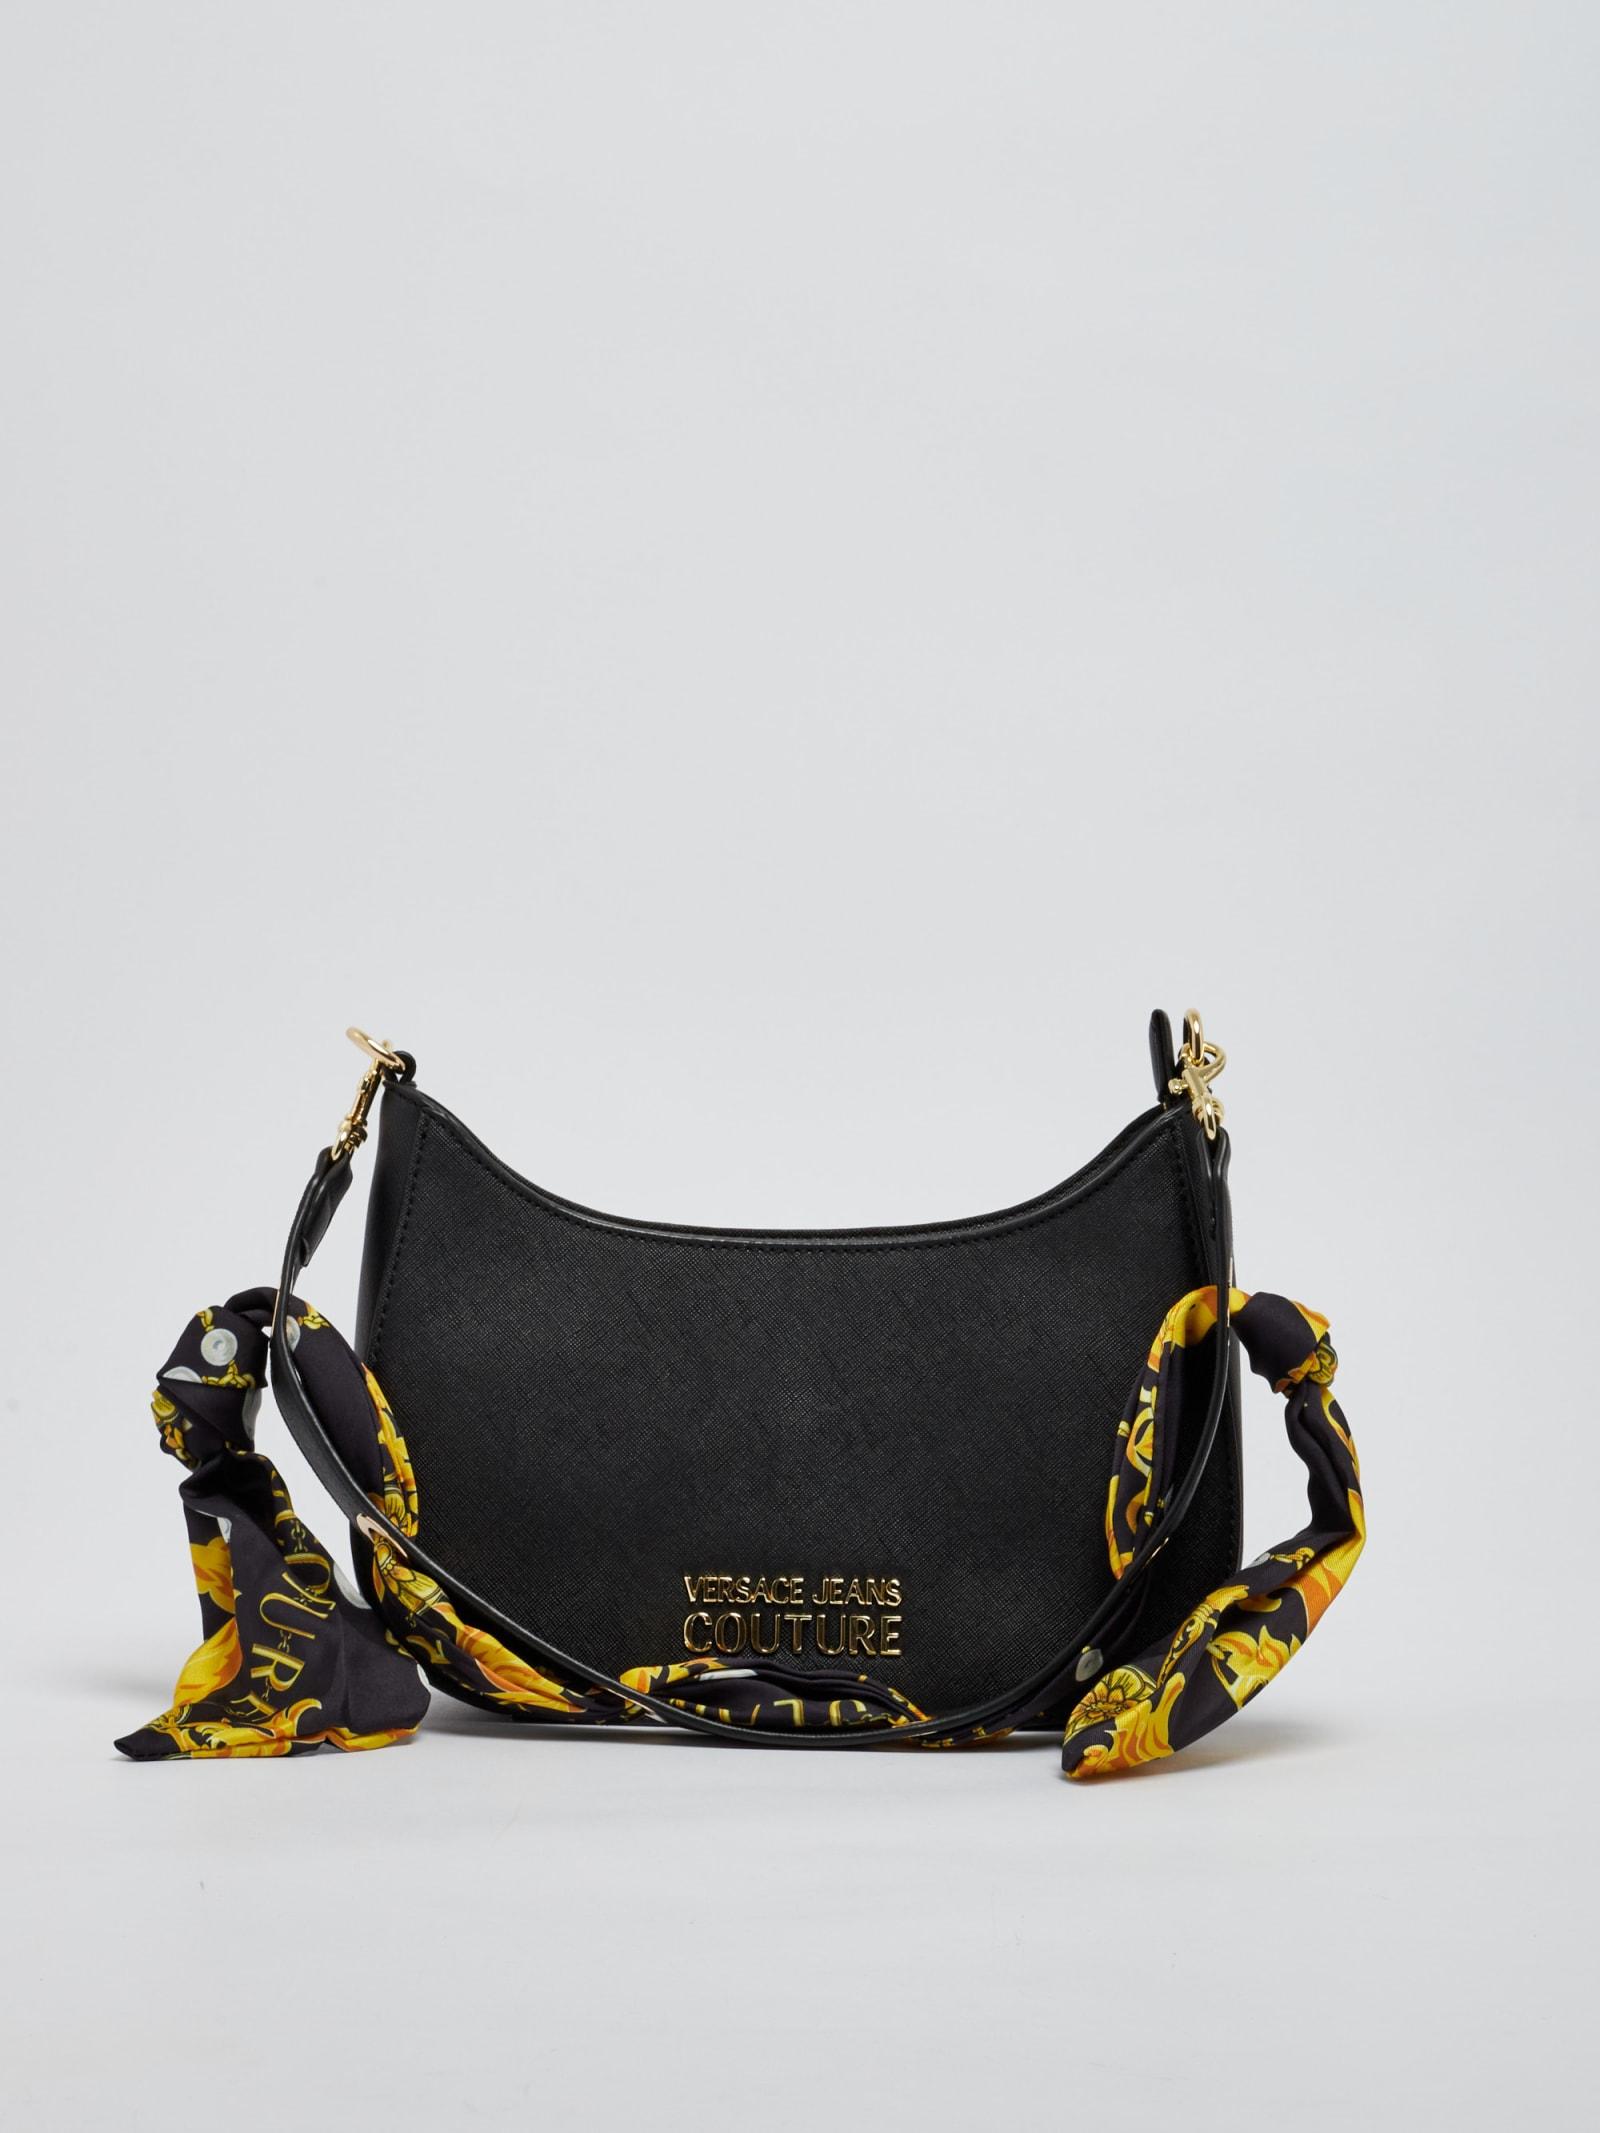 Versace Jeans Couture Range A Thelma Classic Shoulder Bag in Black | Lyst